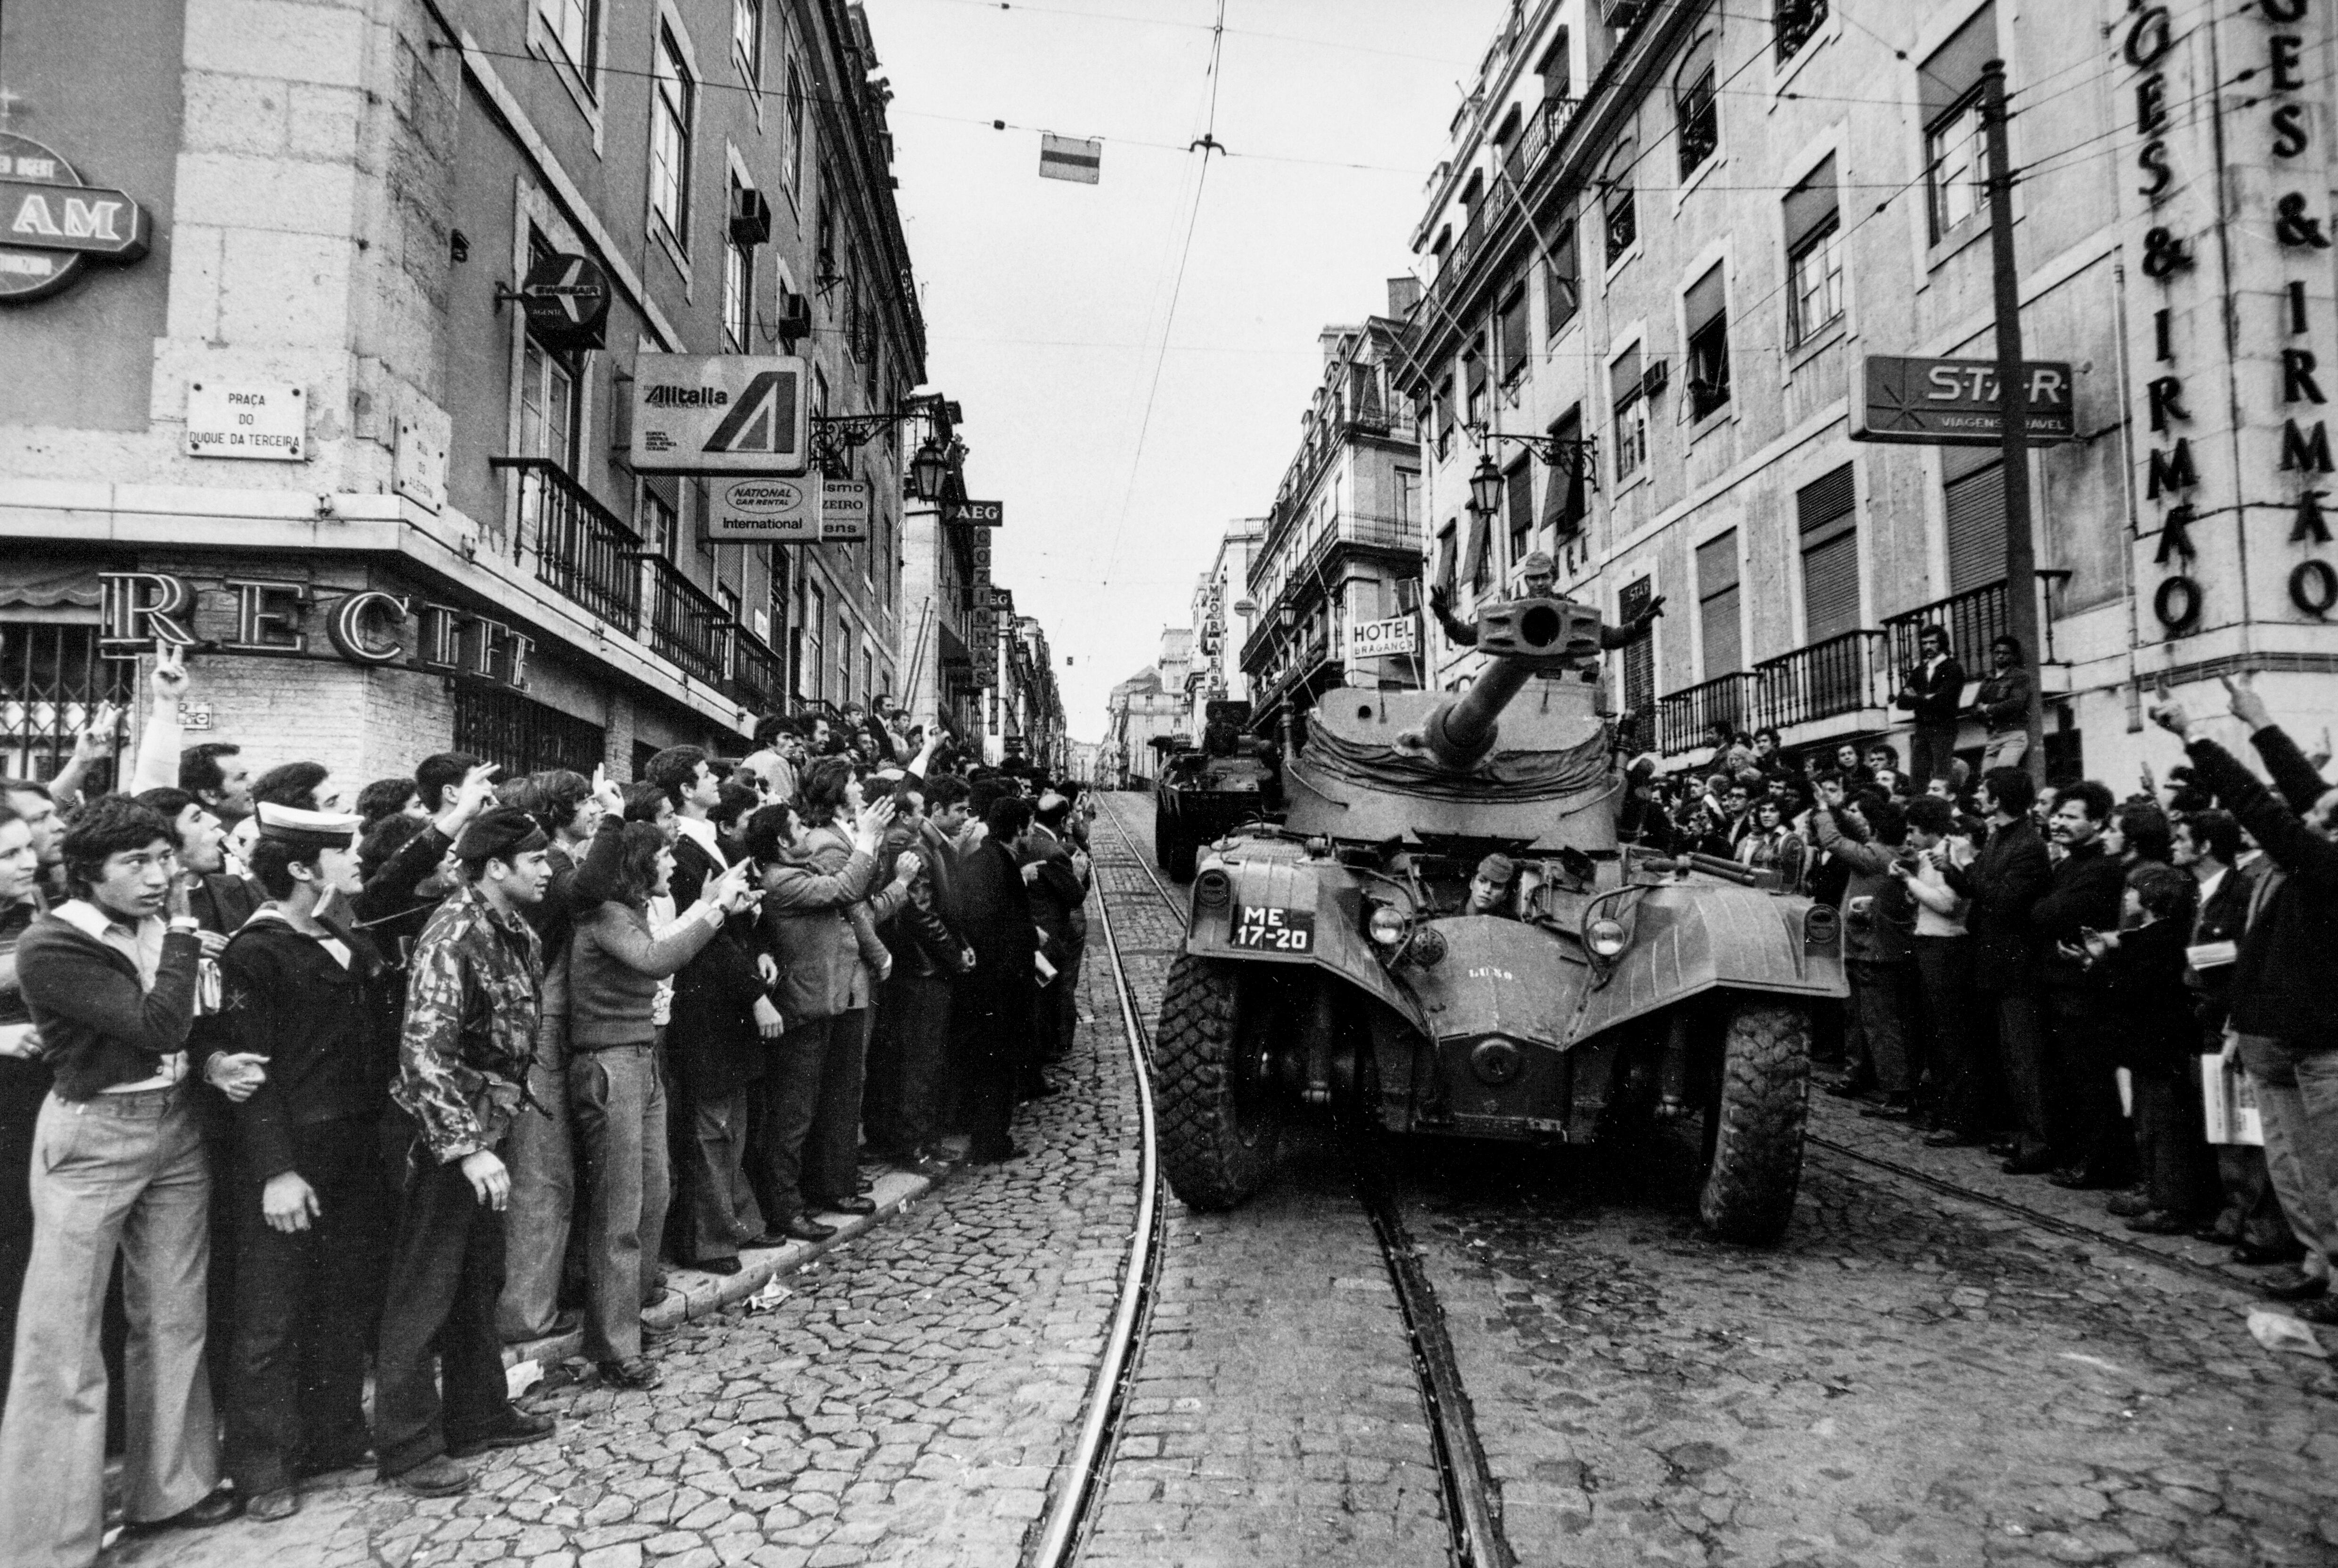 Citizens cheer soldiers in armored vehicles on April 25, 1974, on a street in Lisbon.